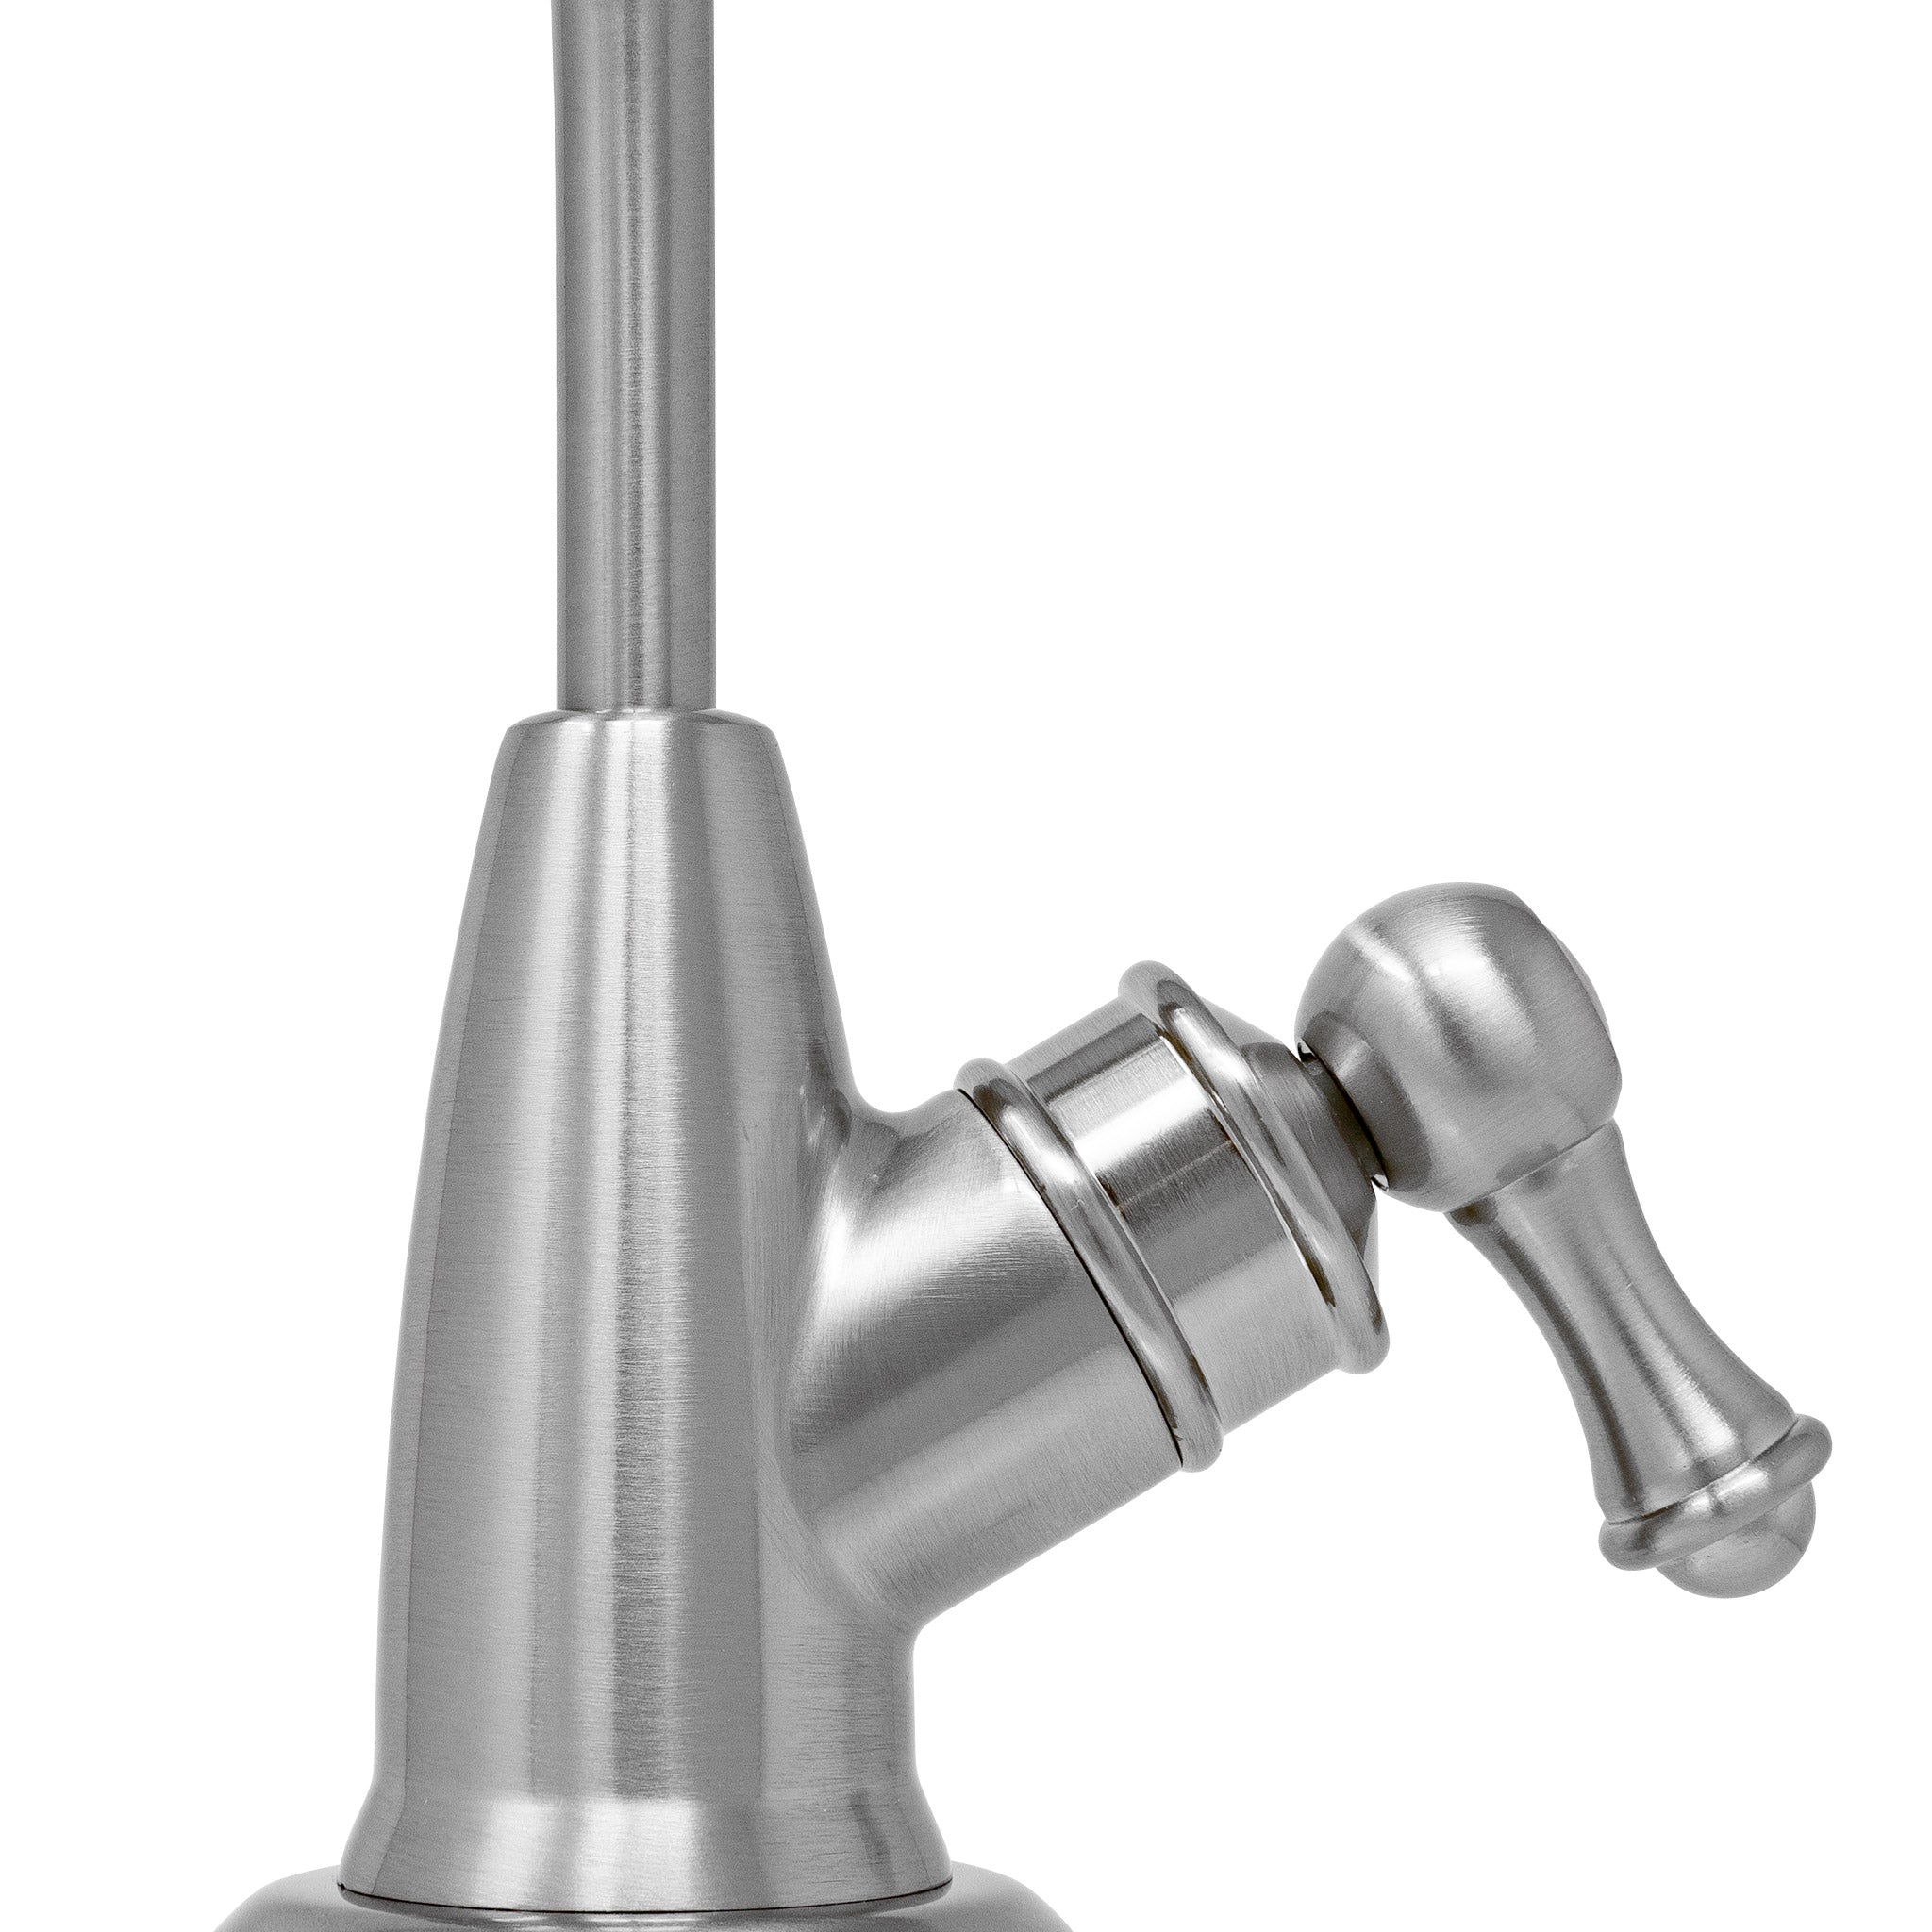 Brushed Nickel Long Reach Style Water Filtration Faucet Non Air Gap